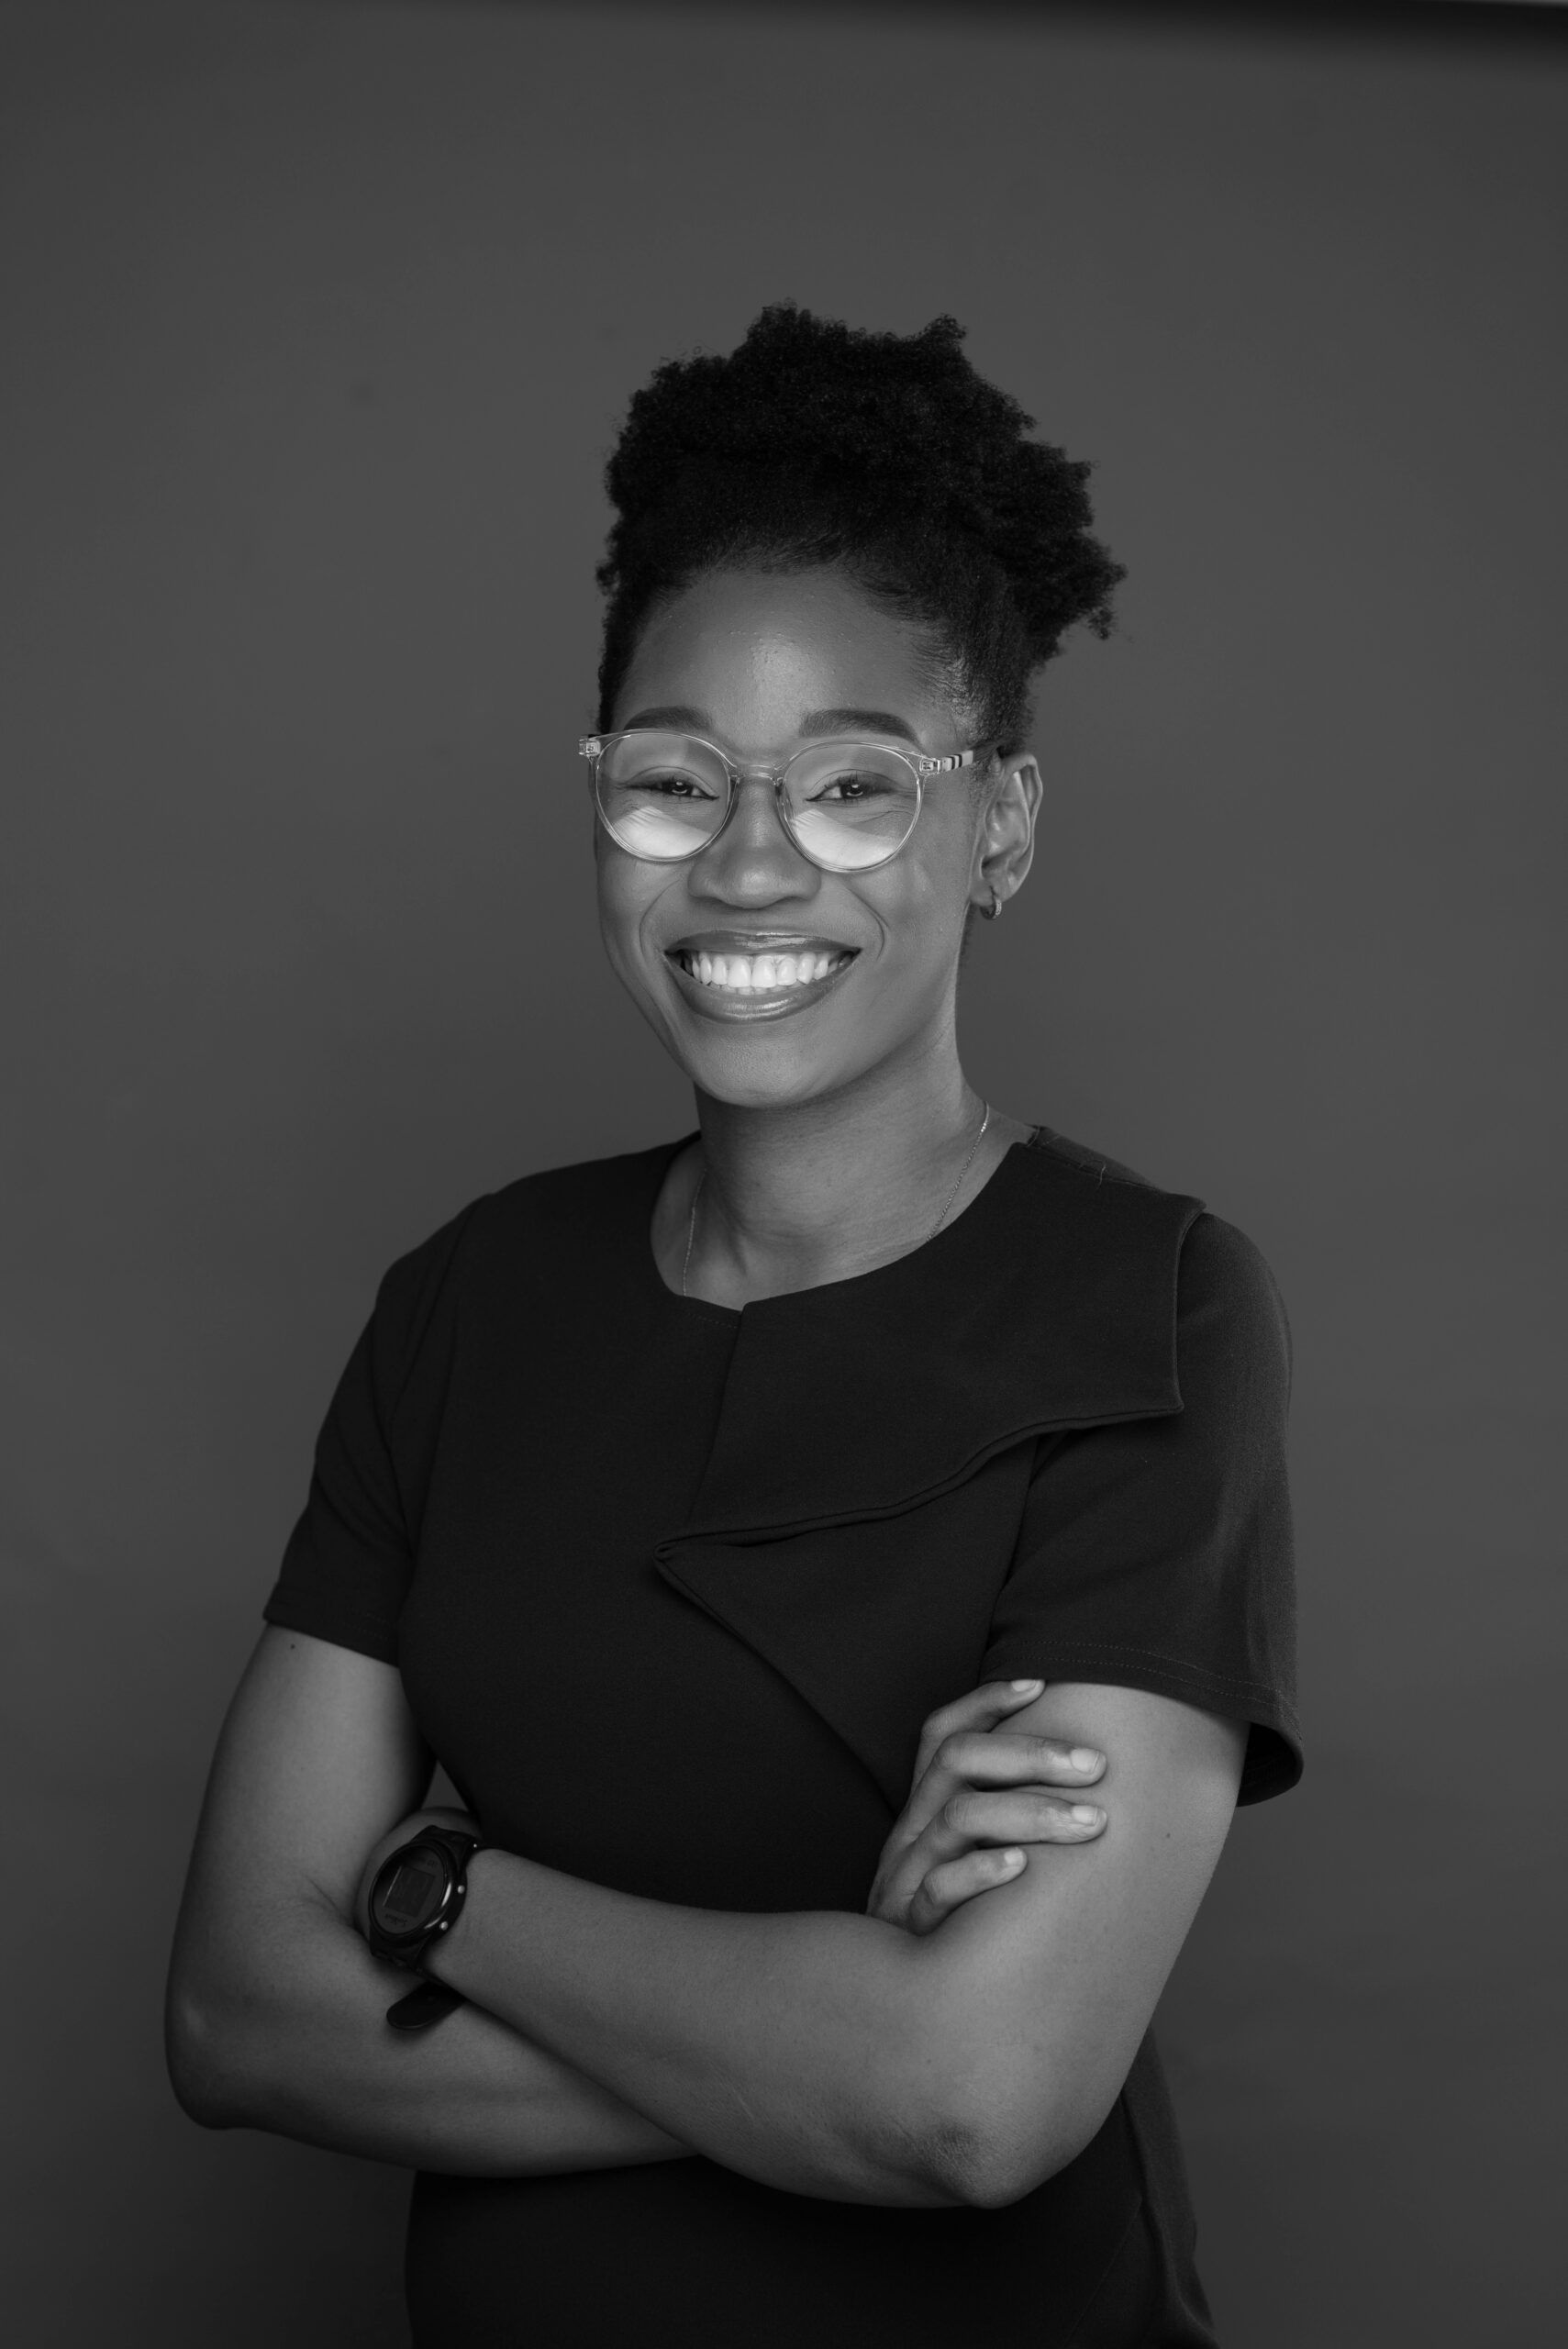 Black and white shot of Kelechi Achinonu, a young woman wearing glasses and a black t-shirt, with arms crossed